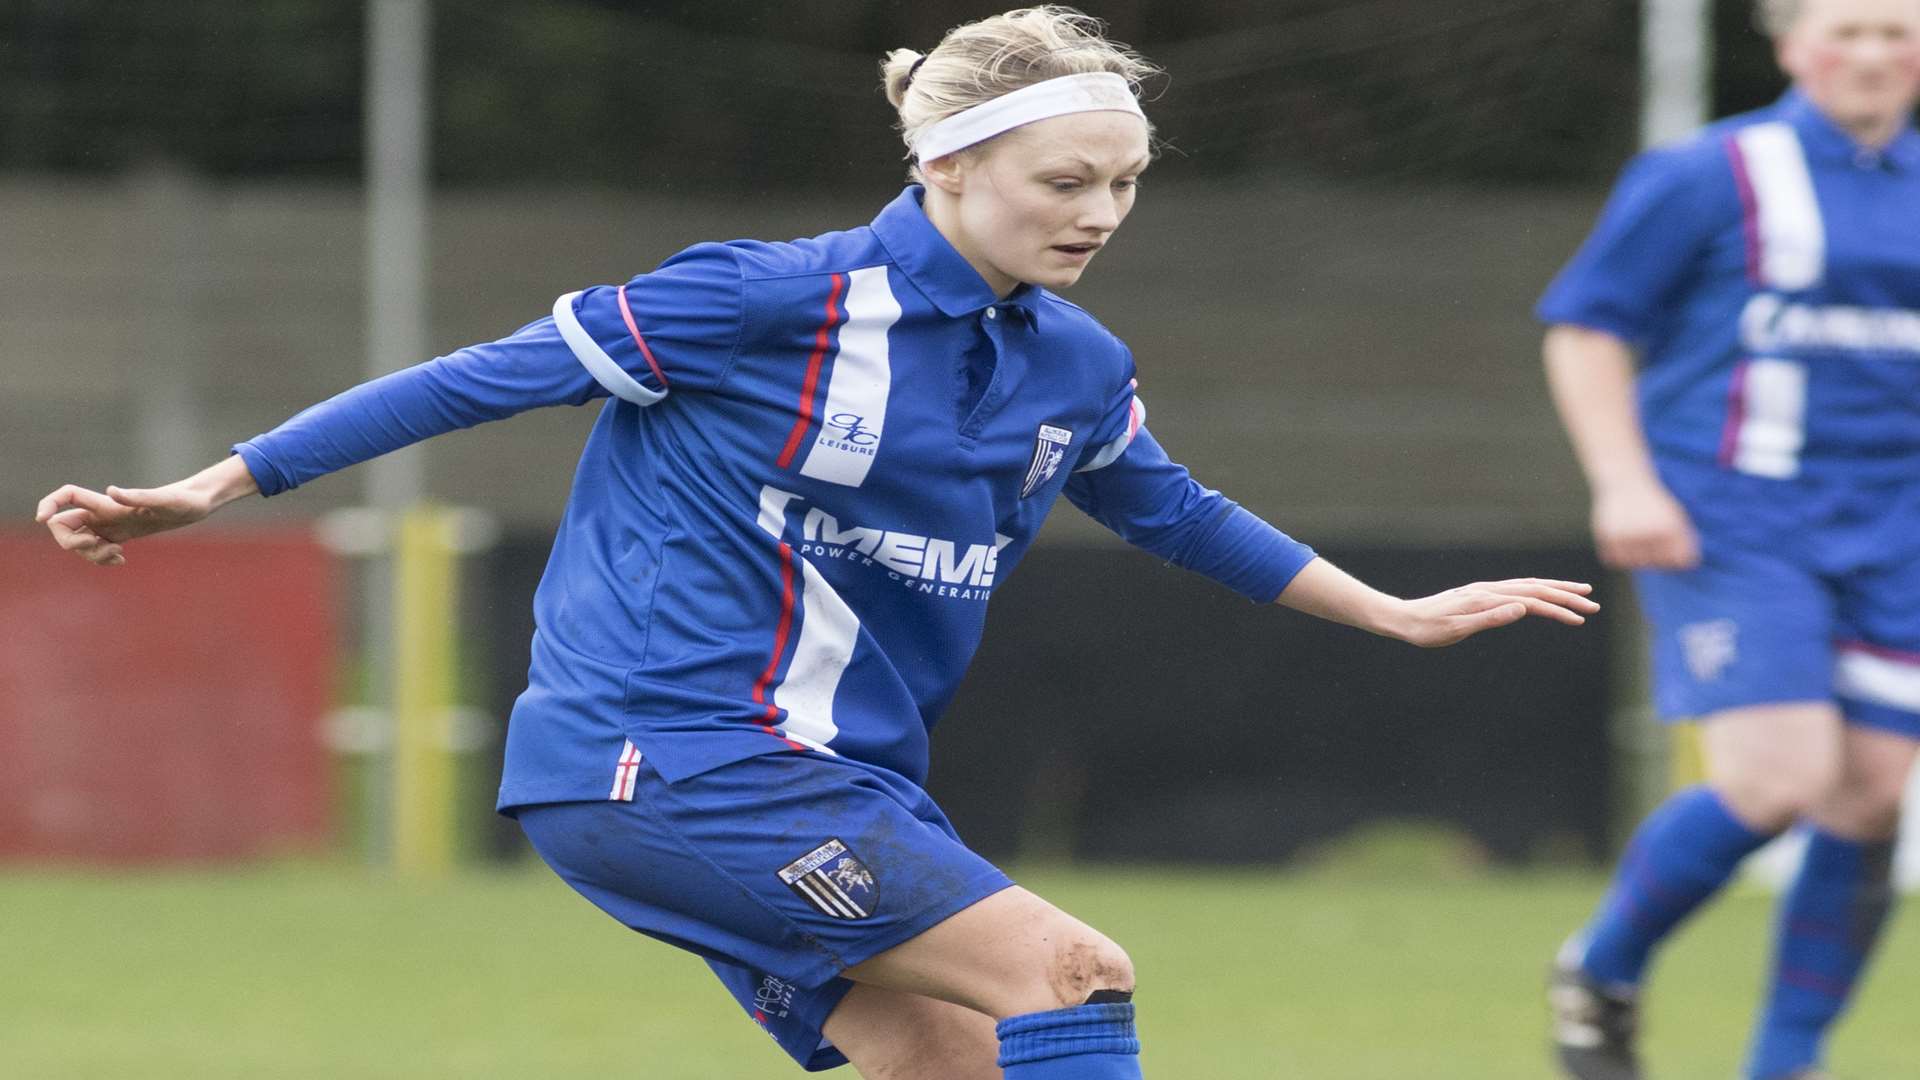 Emma Tune in action for Gillingham Ladies